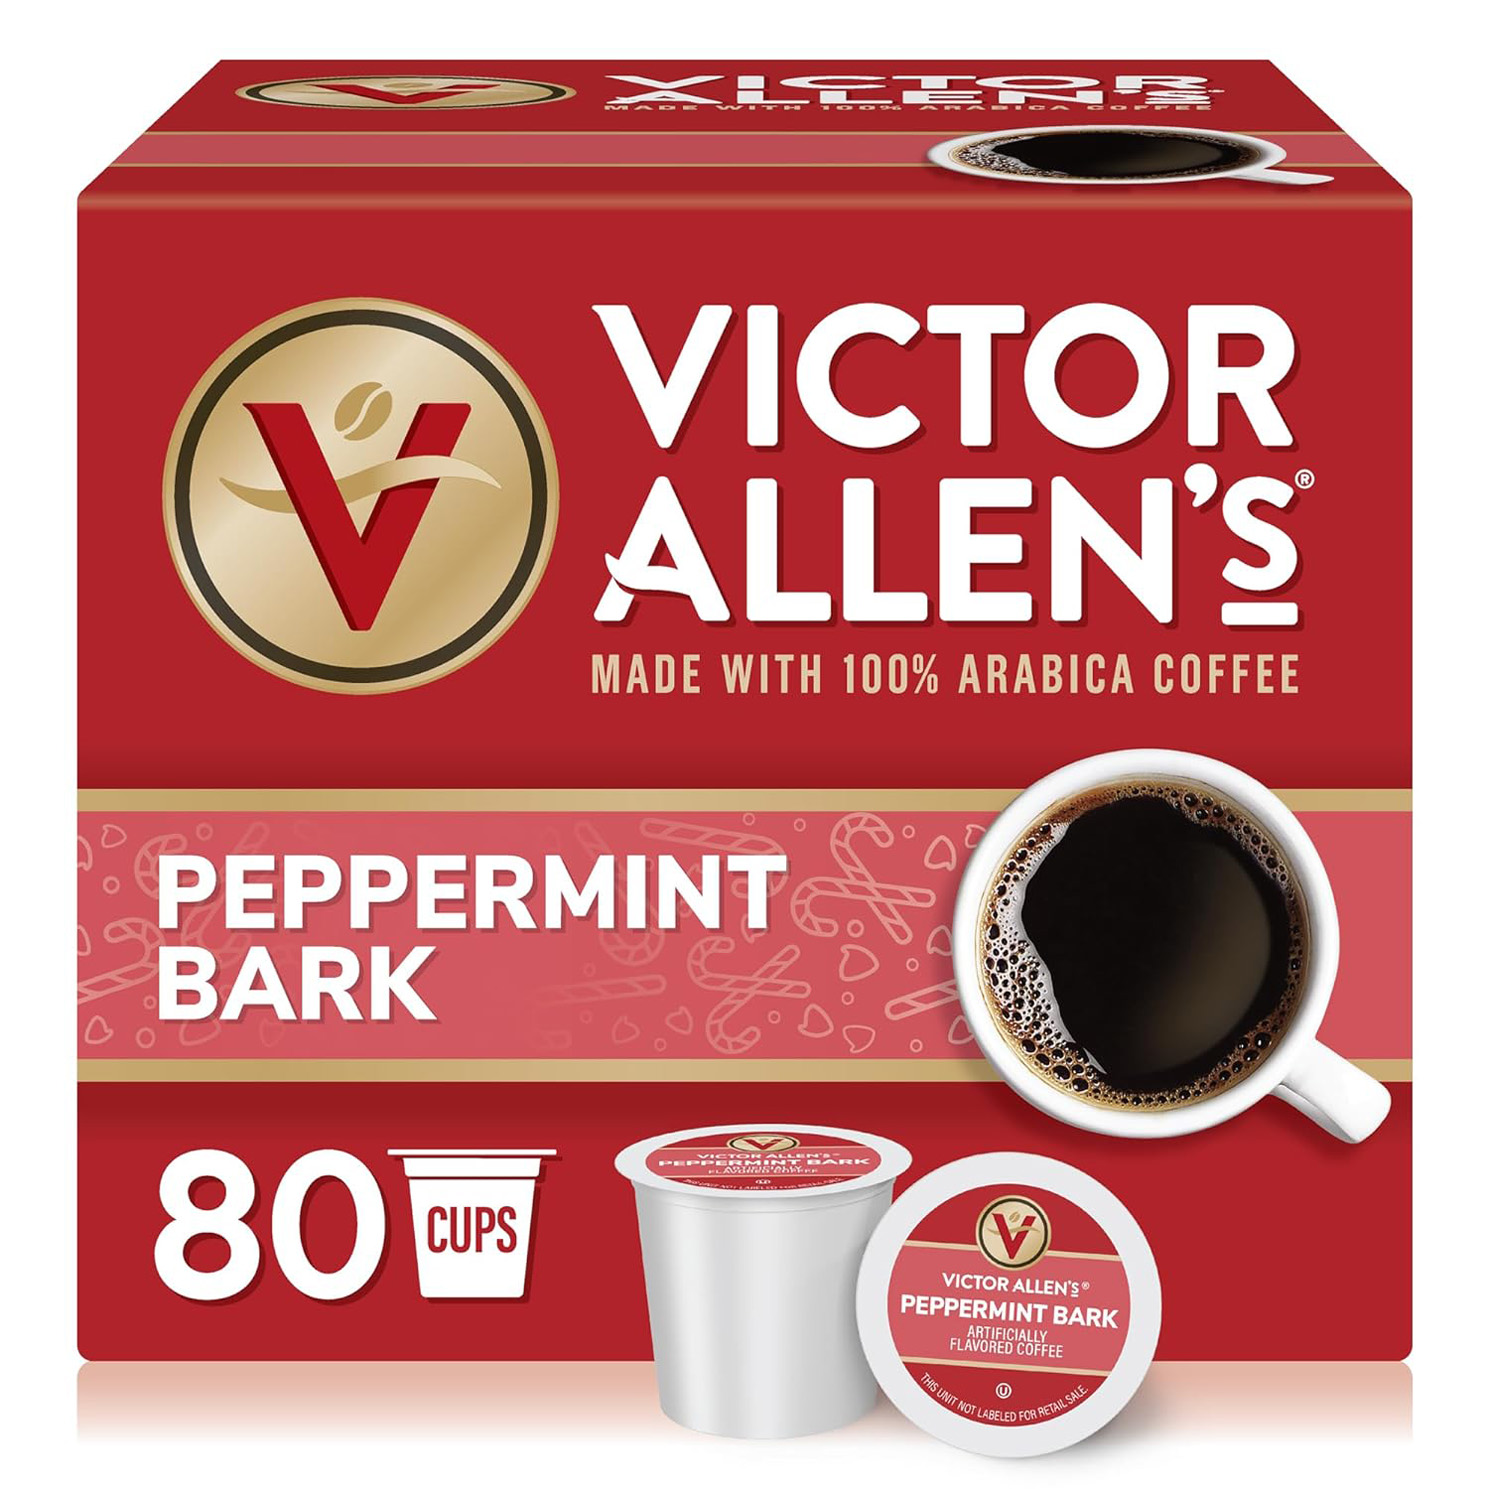 Victor Allen’s Coffee Peppermint Bark Flavored, Medium Roast, 80 Count, Single Serve Coffee Pods for Keurig K-Cup Brewers